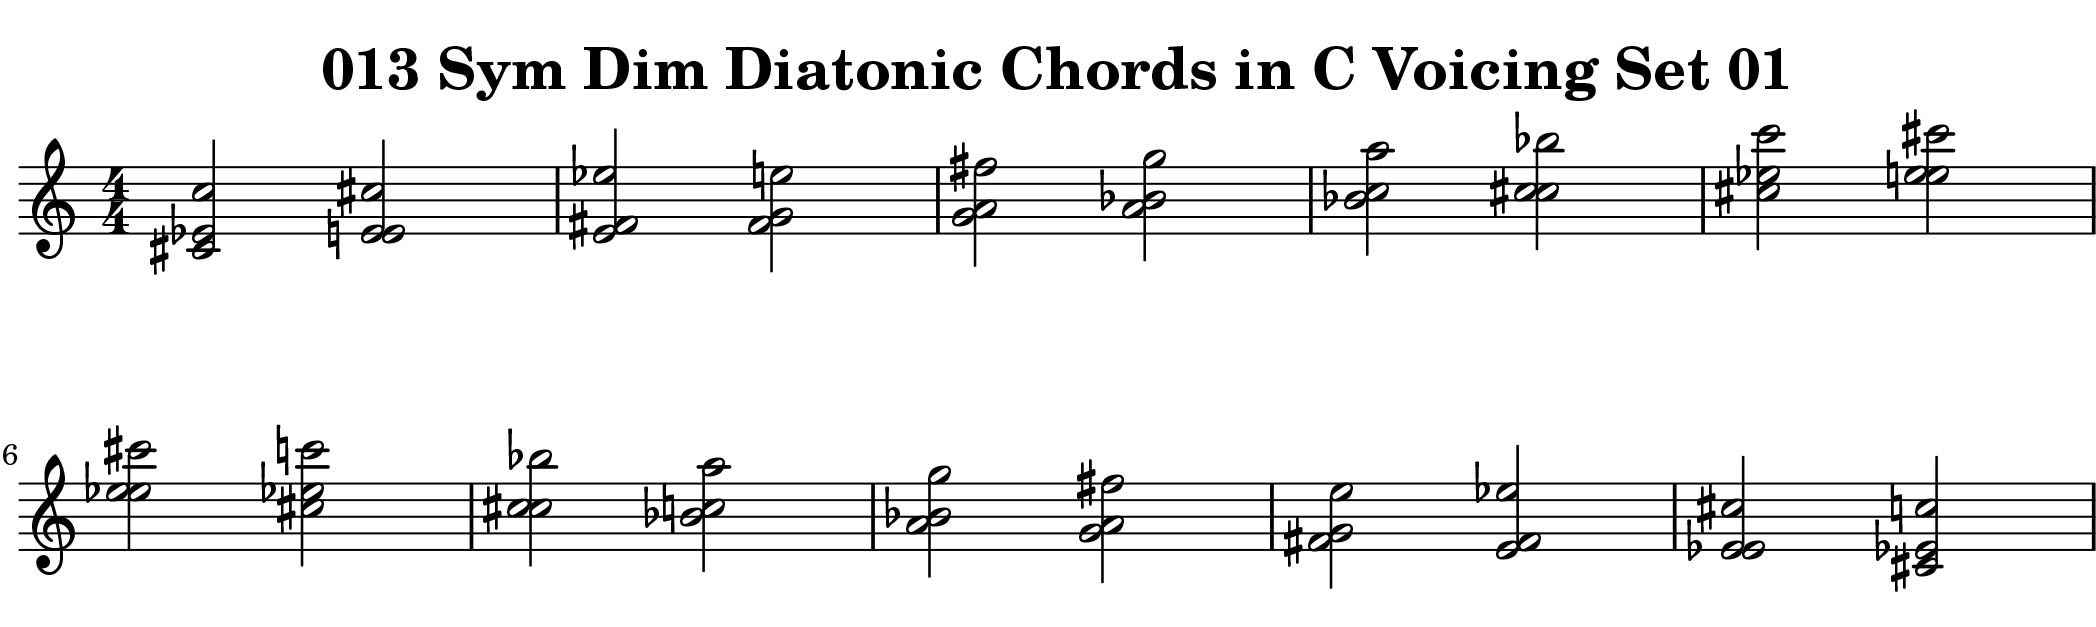 Example from ChopBusters 013: Diatonic Chords of Symmetrical Diminished Scale Ascending and Descending